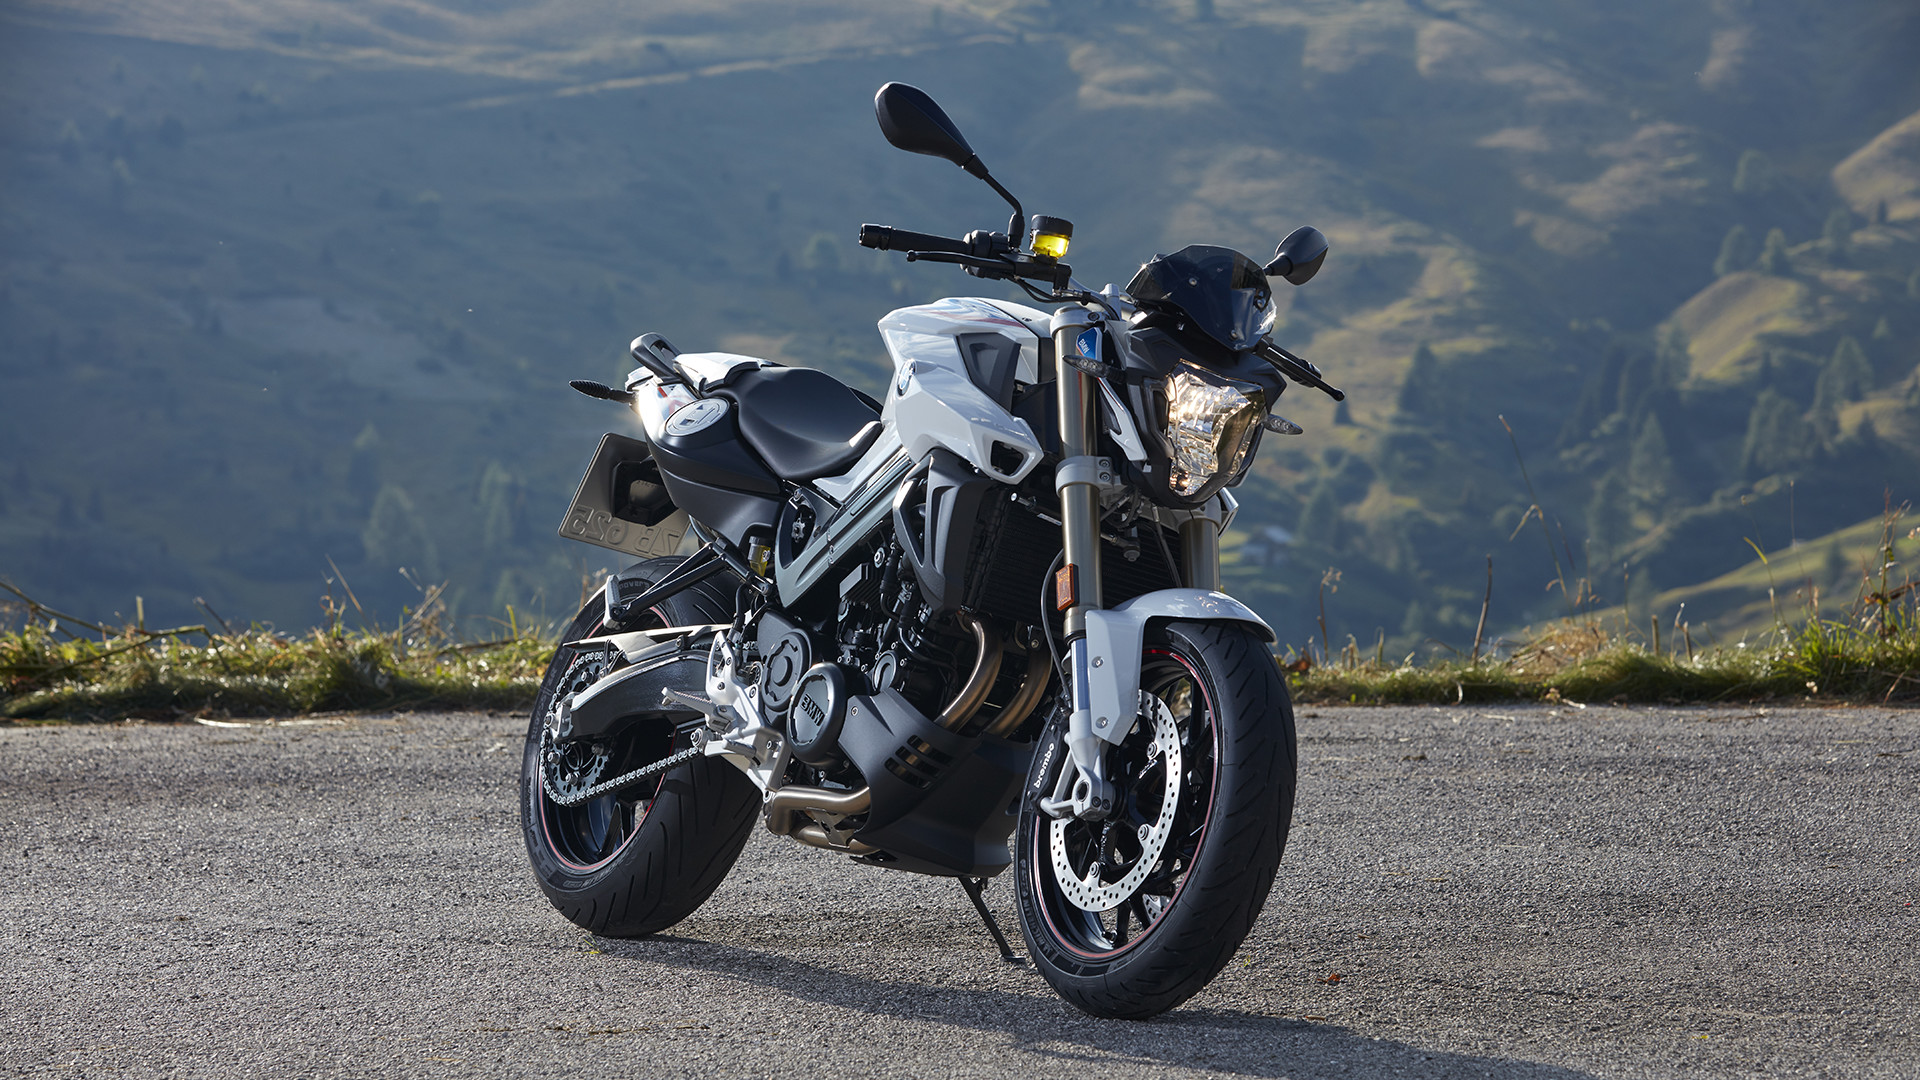 2015 BMW F 800 R - First Look Review | Rider Magazine 